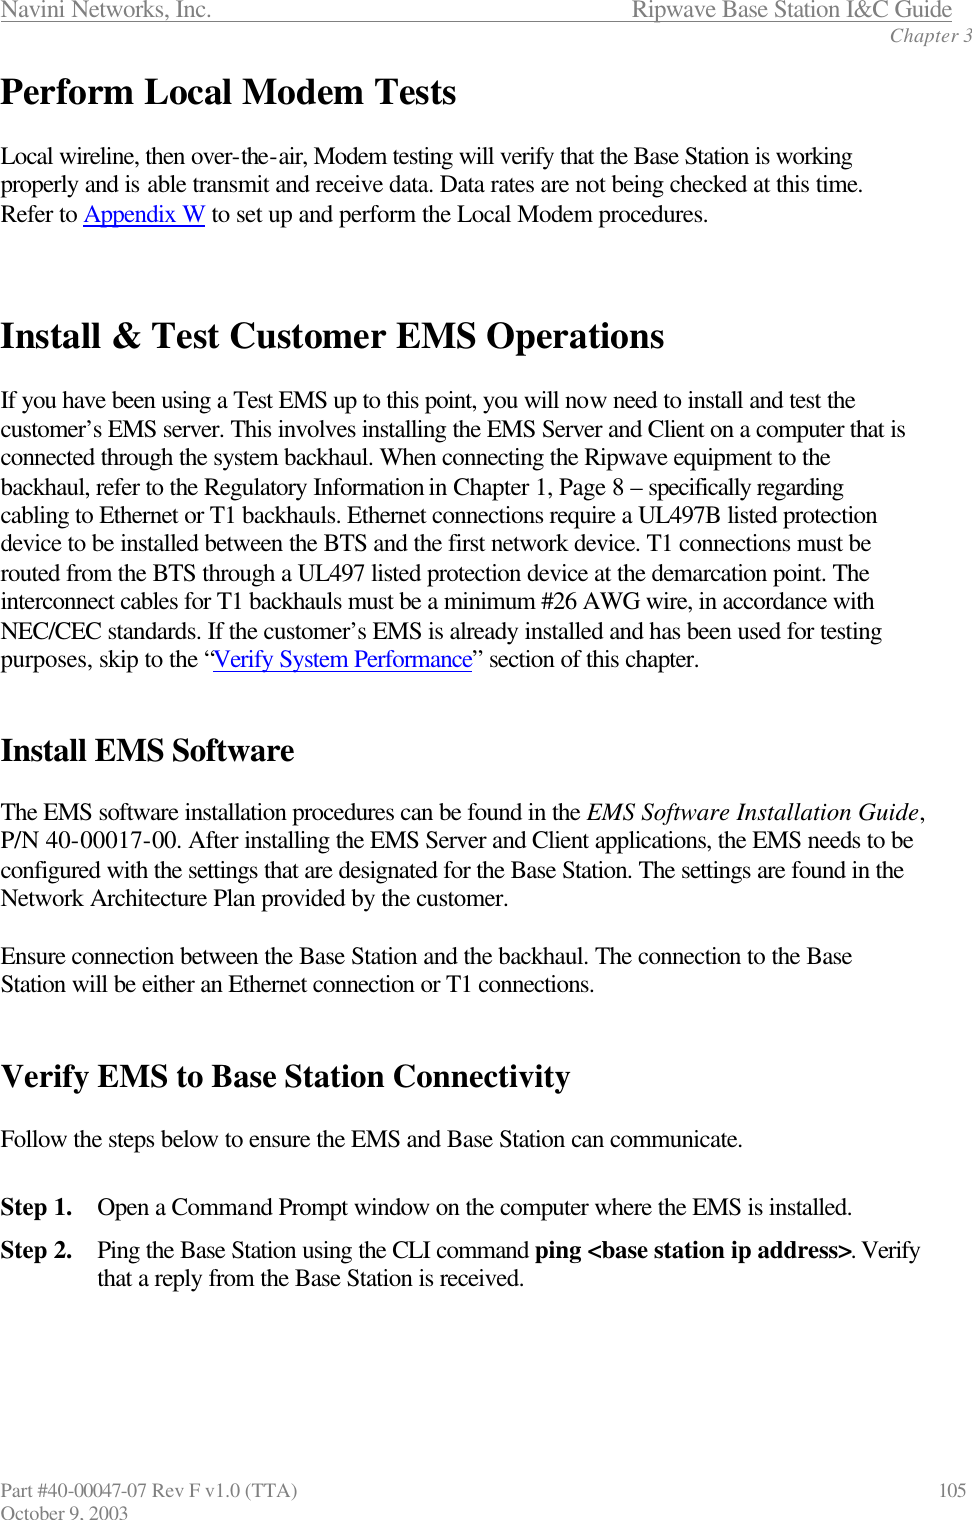 Navini Networks, Inc.                           Ripwave Base Station I&amp;C Guide Chapter 3 Part #40-00047-07 Rev F v1.0 (TTA)                             105 October 9, 2003 Perform Local Modem Tests  Local wireline, then over-the-air, Modem testing will verify that the Base Station is working properly and is able transmit and receive data. Data rates are not being checked at this time. Refer to Appendix W to set up and perform the Local Modem procedures.    Install &amp; Test Customer EMS Operations  If you have been using a Test EMS up to this point, you will now need to install and test the customer’s EMS server. This involves installing the EMS Server and Client on a computer that is connected through the system backhaul. When connecting the Ripwave equipment to the backhaul, refer to the Regulatory Information in Chapter 1, Page 8 – specifically regarding cabling to Ethernet or T1 backhauls. Ethernet connections require a UL497B listed protection device to be installed between the BTS and the first network device. T1 connections must be routed from the BTS through a UL497 listed protection device at the demarcation point. The interconnect cables for T1 backhauls must be a minimum #26 AWG wire, in accordance with NEC/CEC standards. If the customer’s EMS is already installed and has been used for testing purposes, skip to the “Verify System Performance” section of this chapter.    Install EMS Software  The EMS software installation procedures can be found in the EMS Software Installation Guide, P/N 40-00017-00. After installing the EMS Server and Client applications, the EMS needs to be configured with the settings that are designated for the Base Station. The settings are found in the Network Architecture Plan provided by the customer.   Ensure connection between the Base Station and the backhaul. The connection to the Base Station will be either an Ethernet connection or T1 connections.     Verify EMS to Base Station Connectivity  Follow the steps below to ensure the EMS and Base Station can communicate.  Step 1. Open a Command Prompt window on the computer where the EMS is installed.  Step 2. Ping the Base Station using the CLI command ping &lt;base station ip address&gt;. Verify that a reply from the Base Station is received.    